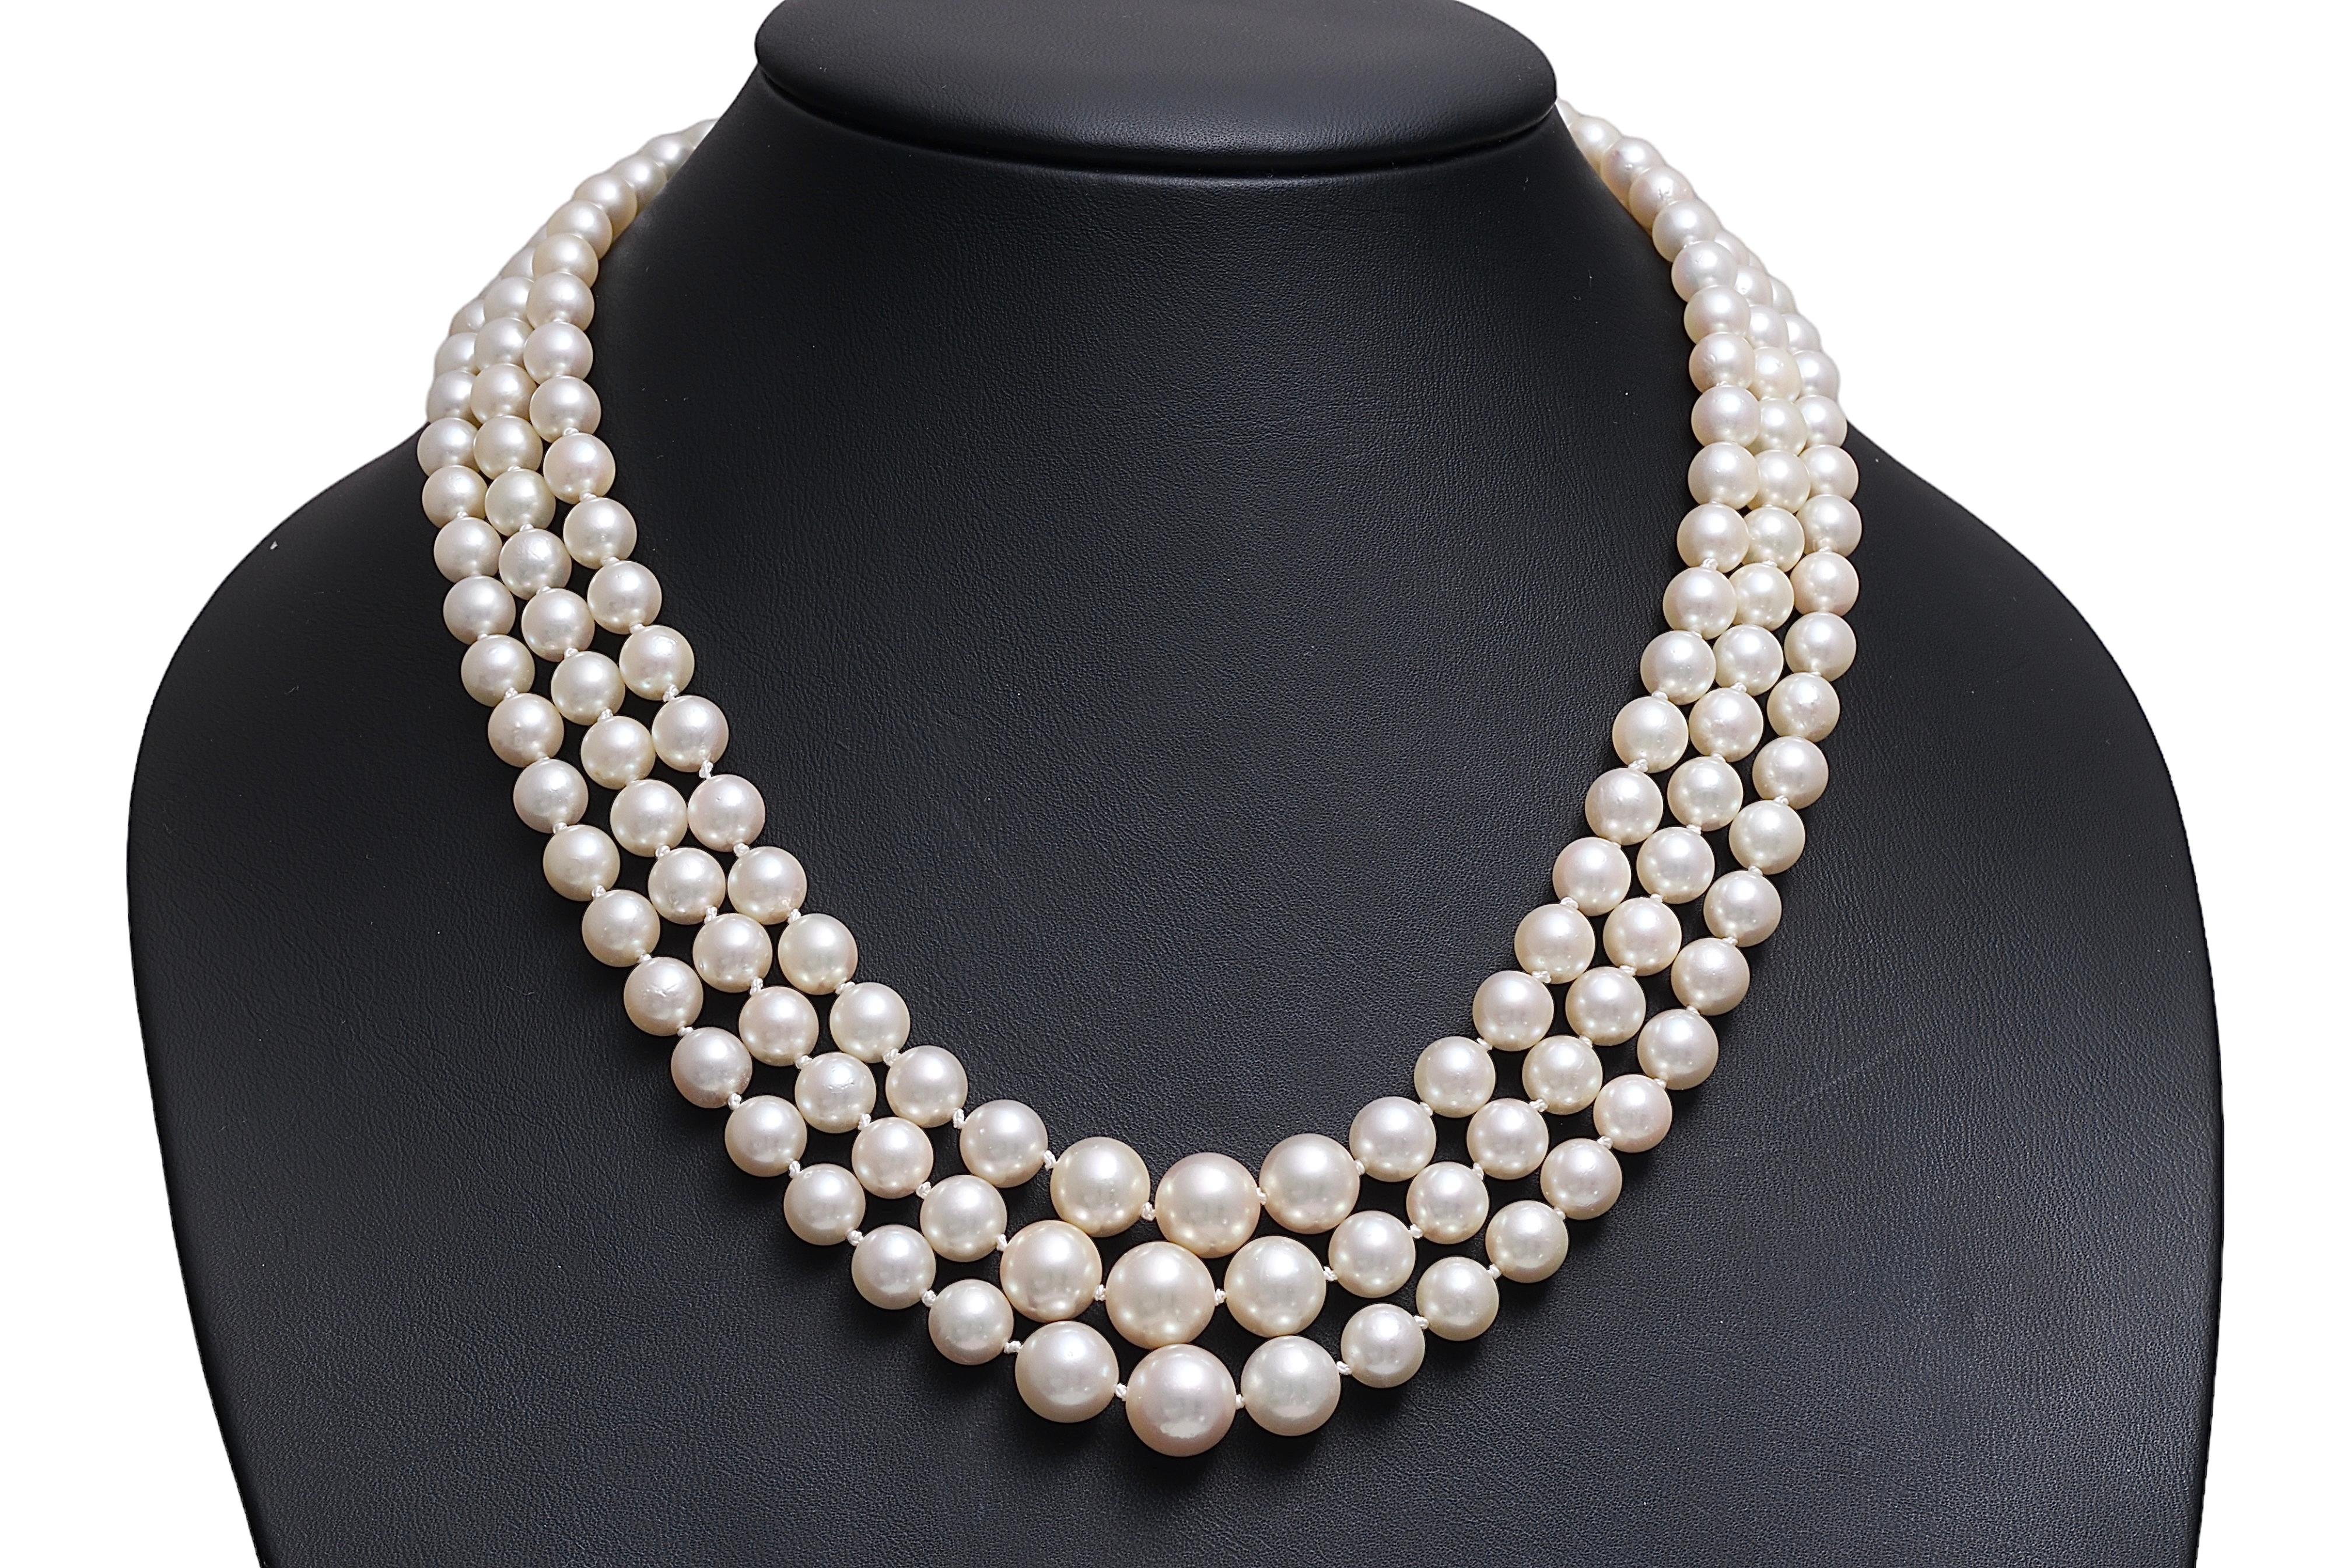 Magnificant Akoya Pearls 3 Strand Degradé Necklace With 18 kt. White Gold Lenti Lock with Diamonds 

Pearls: Amazing Perfect 176 Akoya pearls, diameter biggest pearl 9.6 mm

Material: Necklace lock 18 kt. White gold from brand Lenti
Diamonds: